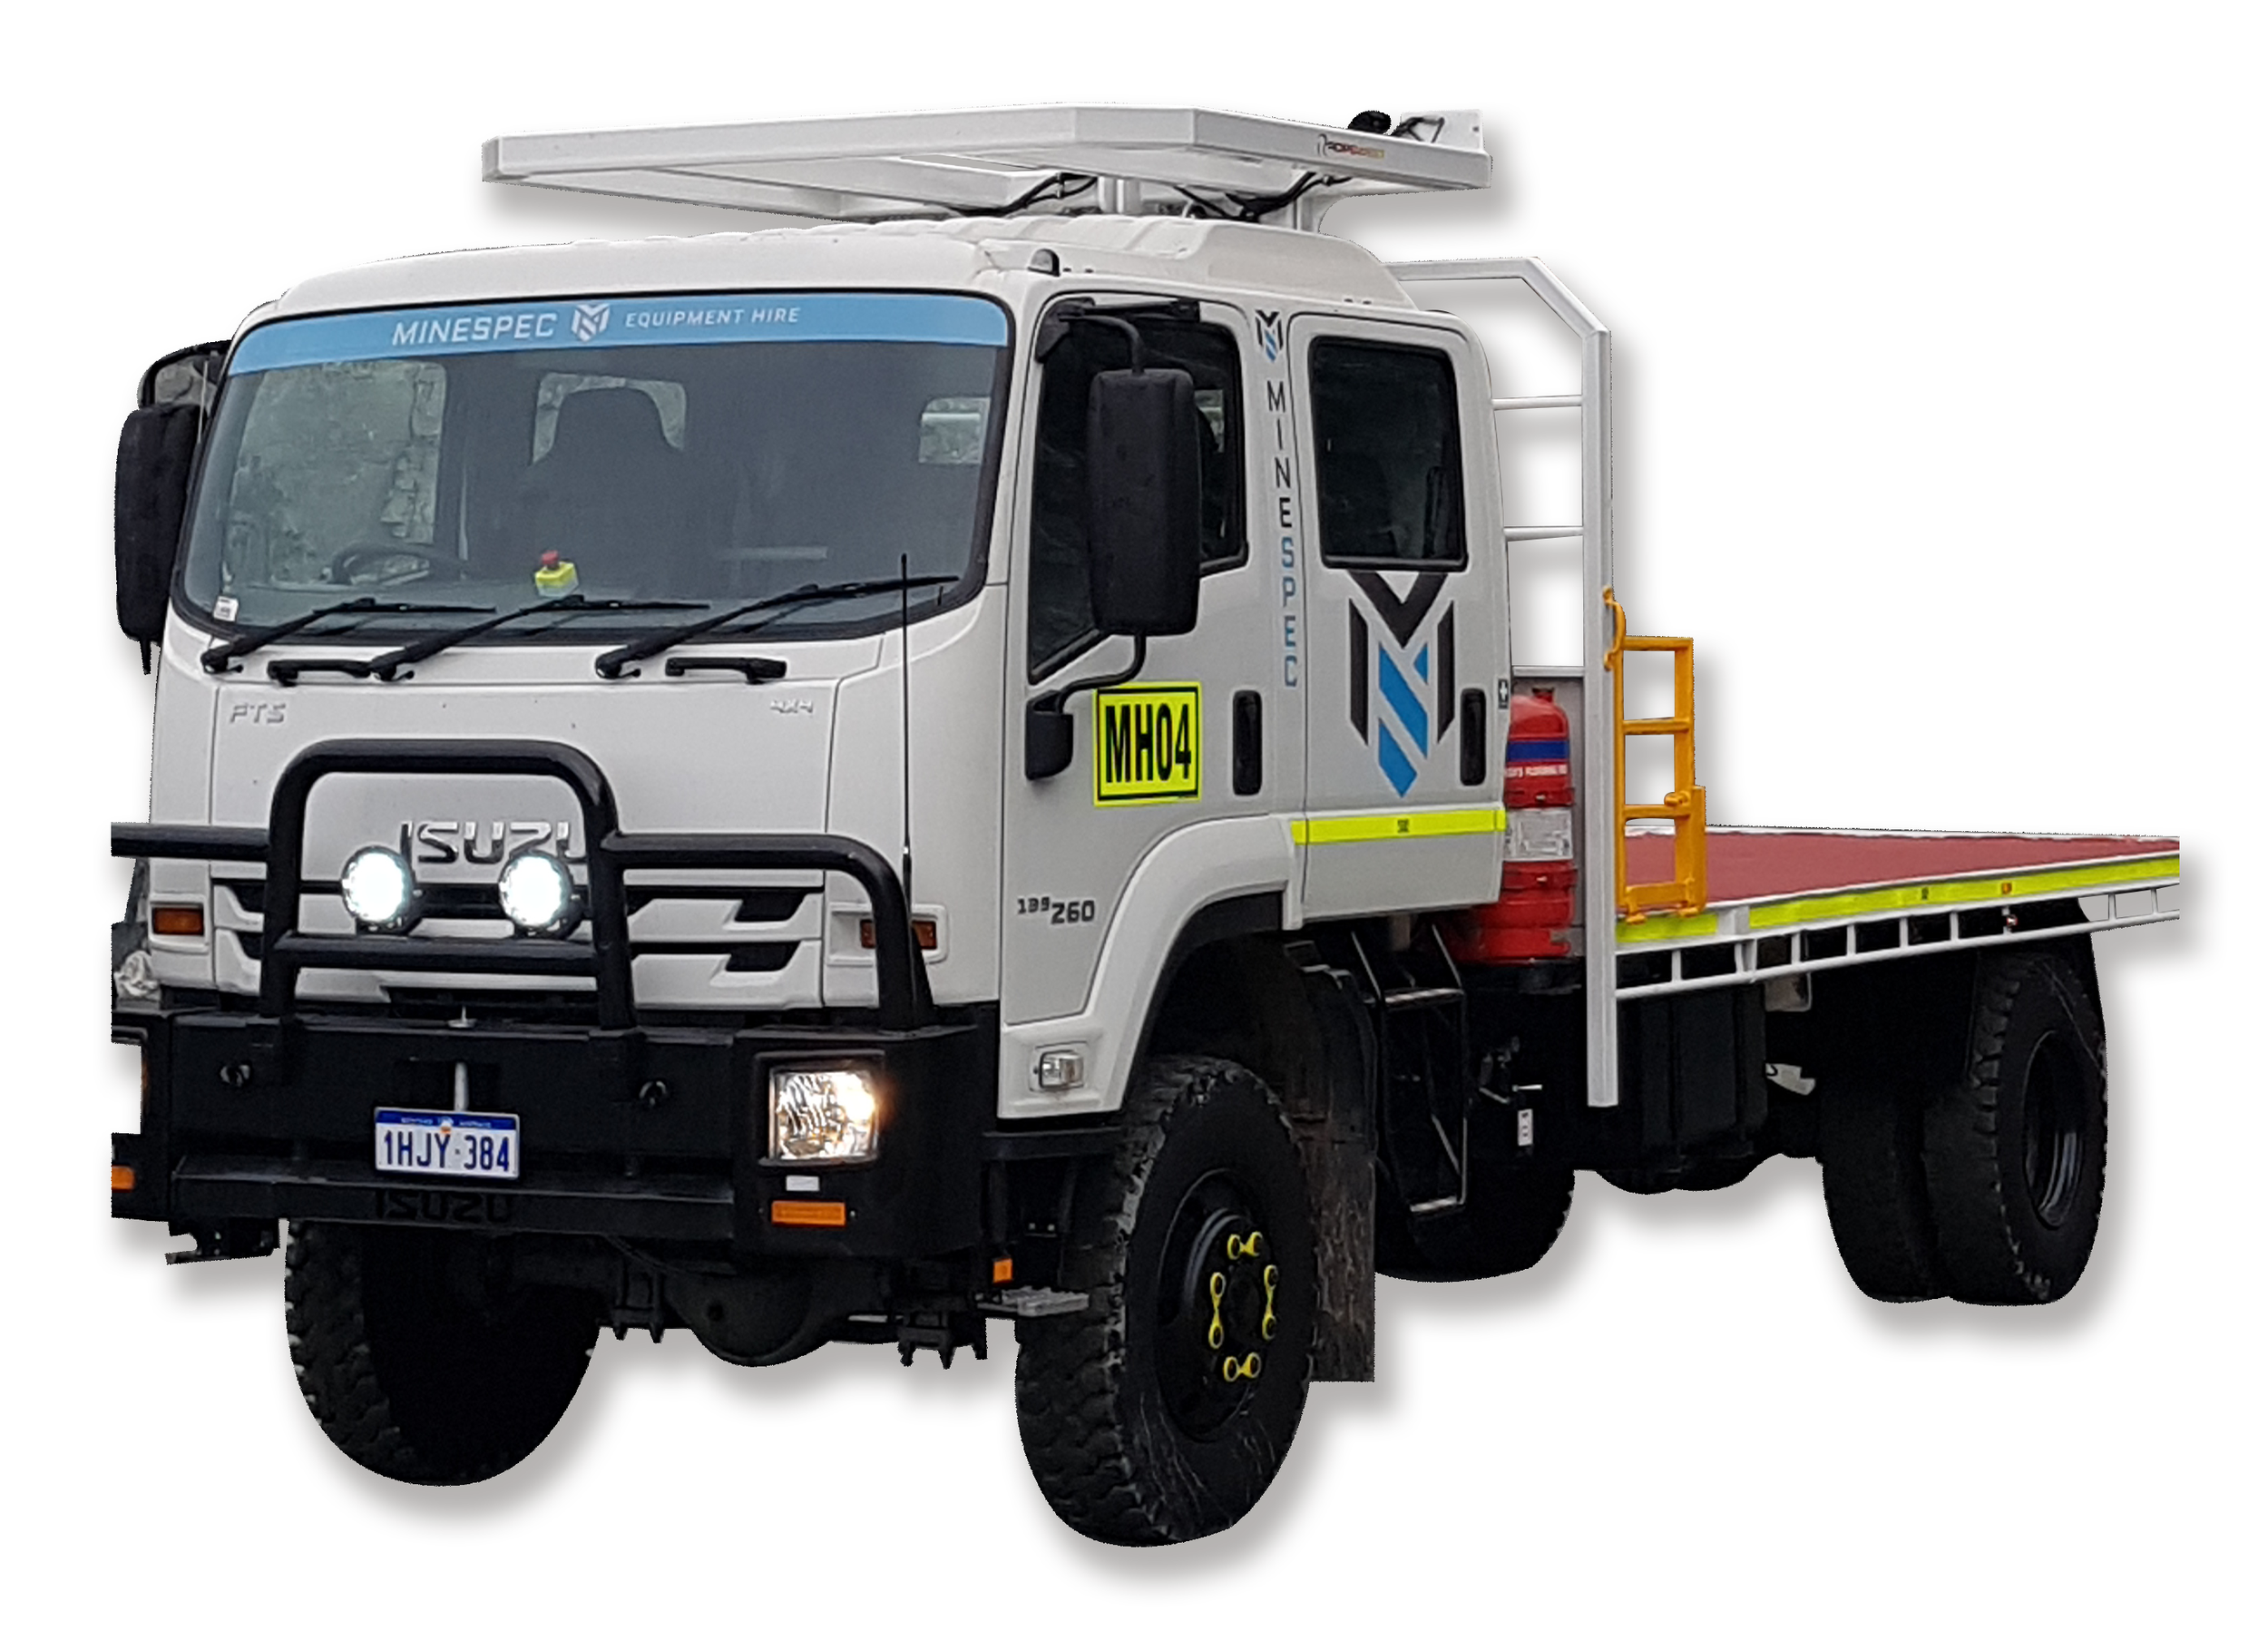  Underground Flat Tray Trucks available for hire in Perth area, WA.  